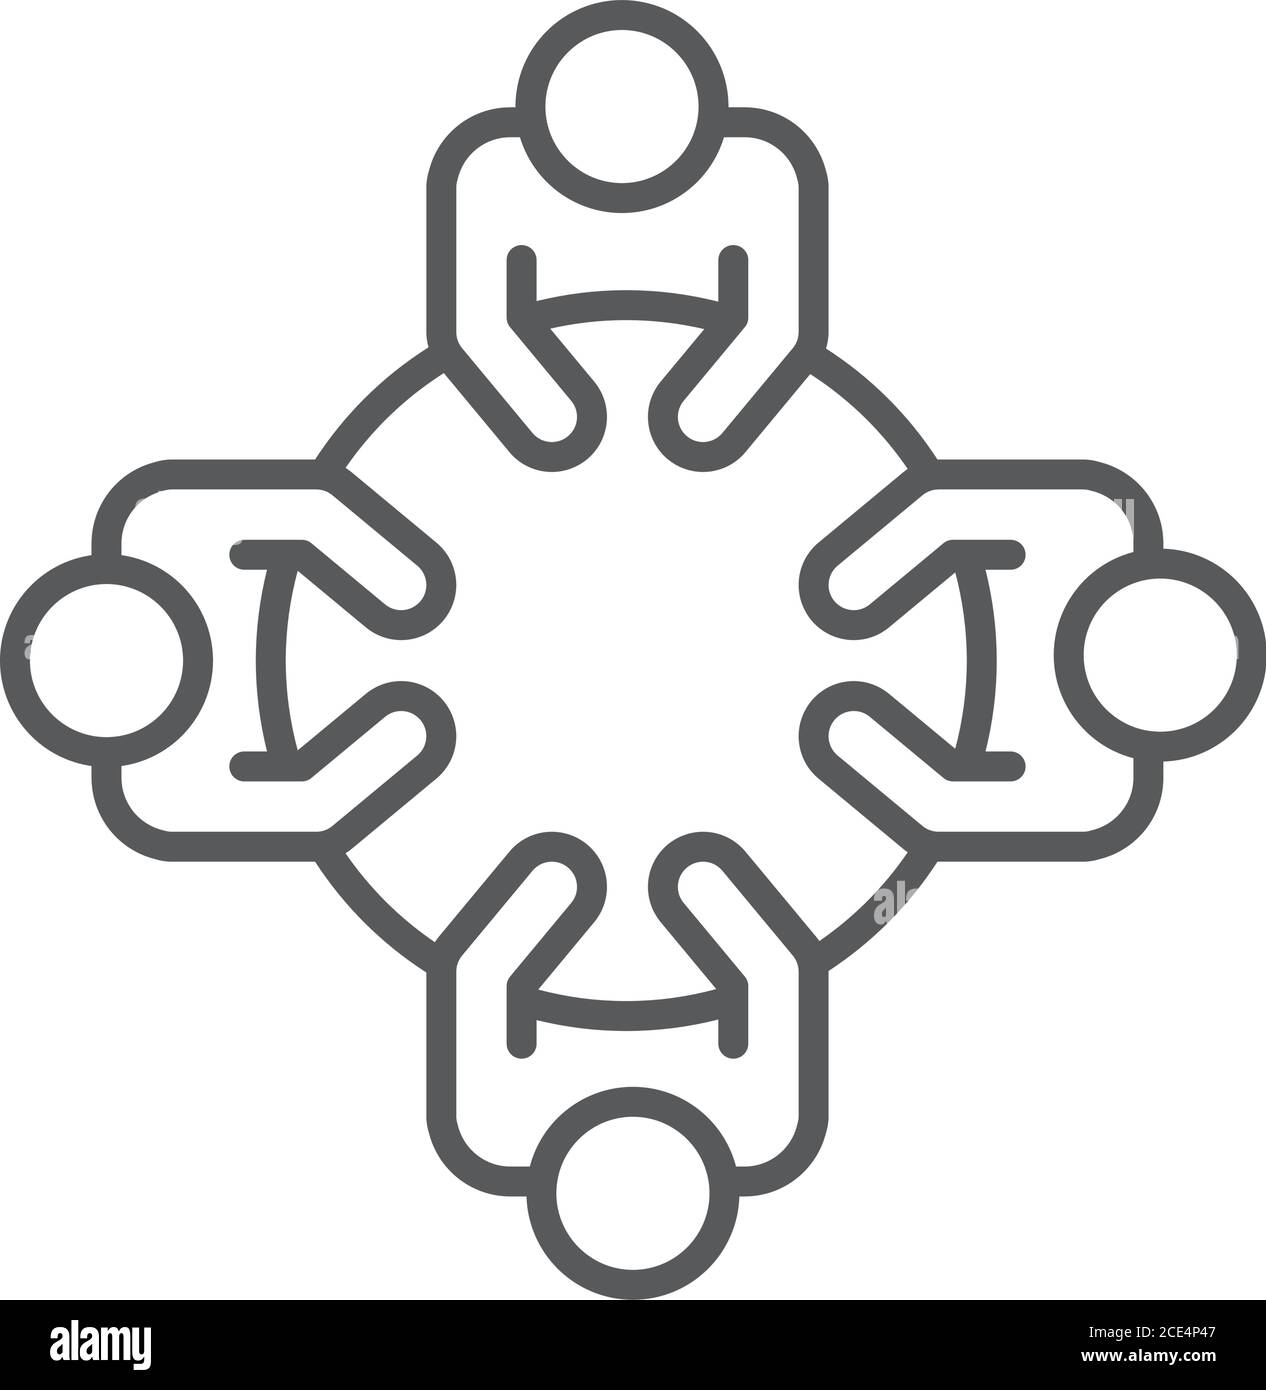 People Working Together Coworking Office Business Workspace Line Icon